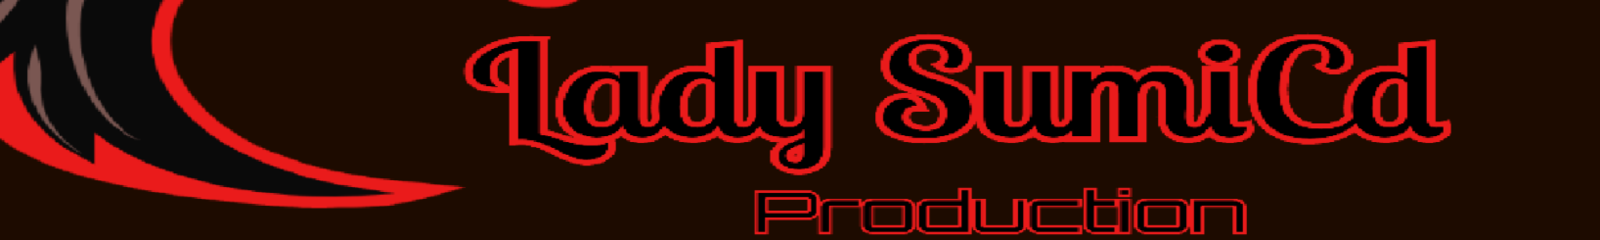 Lady Sumi CD Production